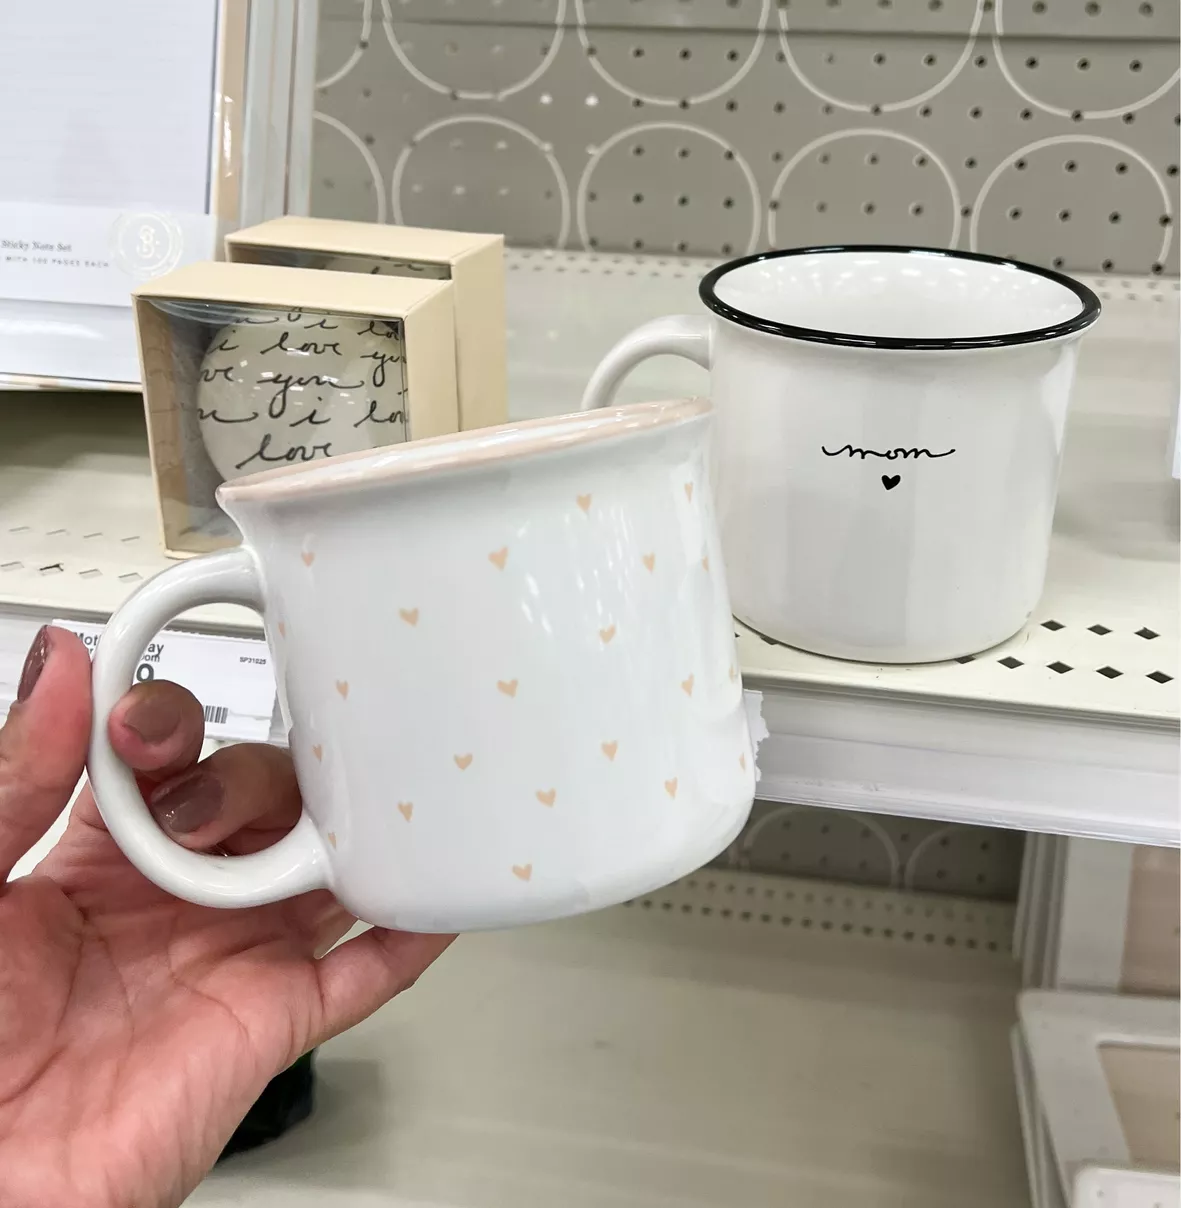 She has SO many cups but this one has a handle and looks like mommy's , Target Cups